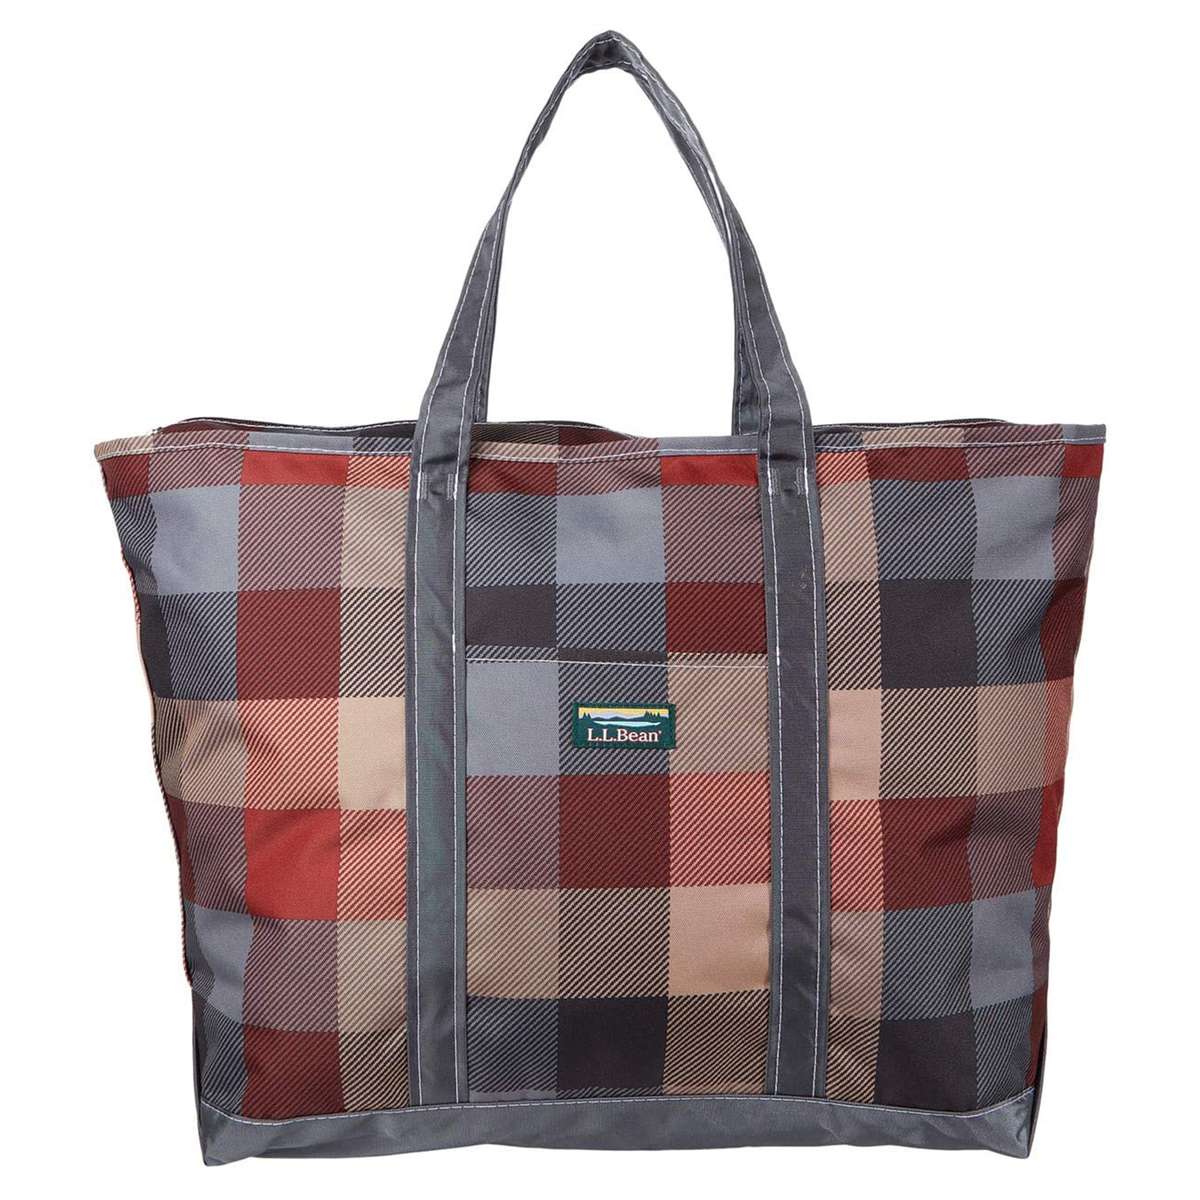 L.L. Bean Black Friday Sale 2020: Boat and Tote Bag Deals | InStyle